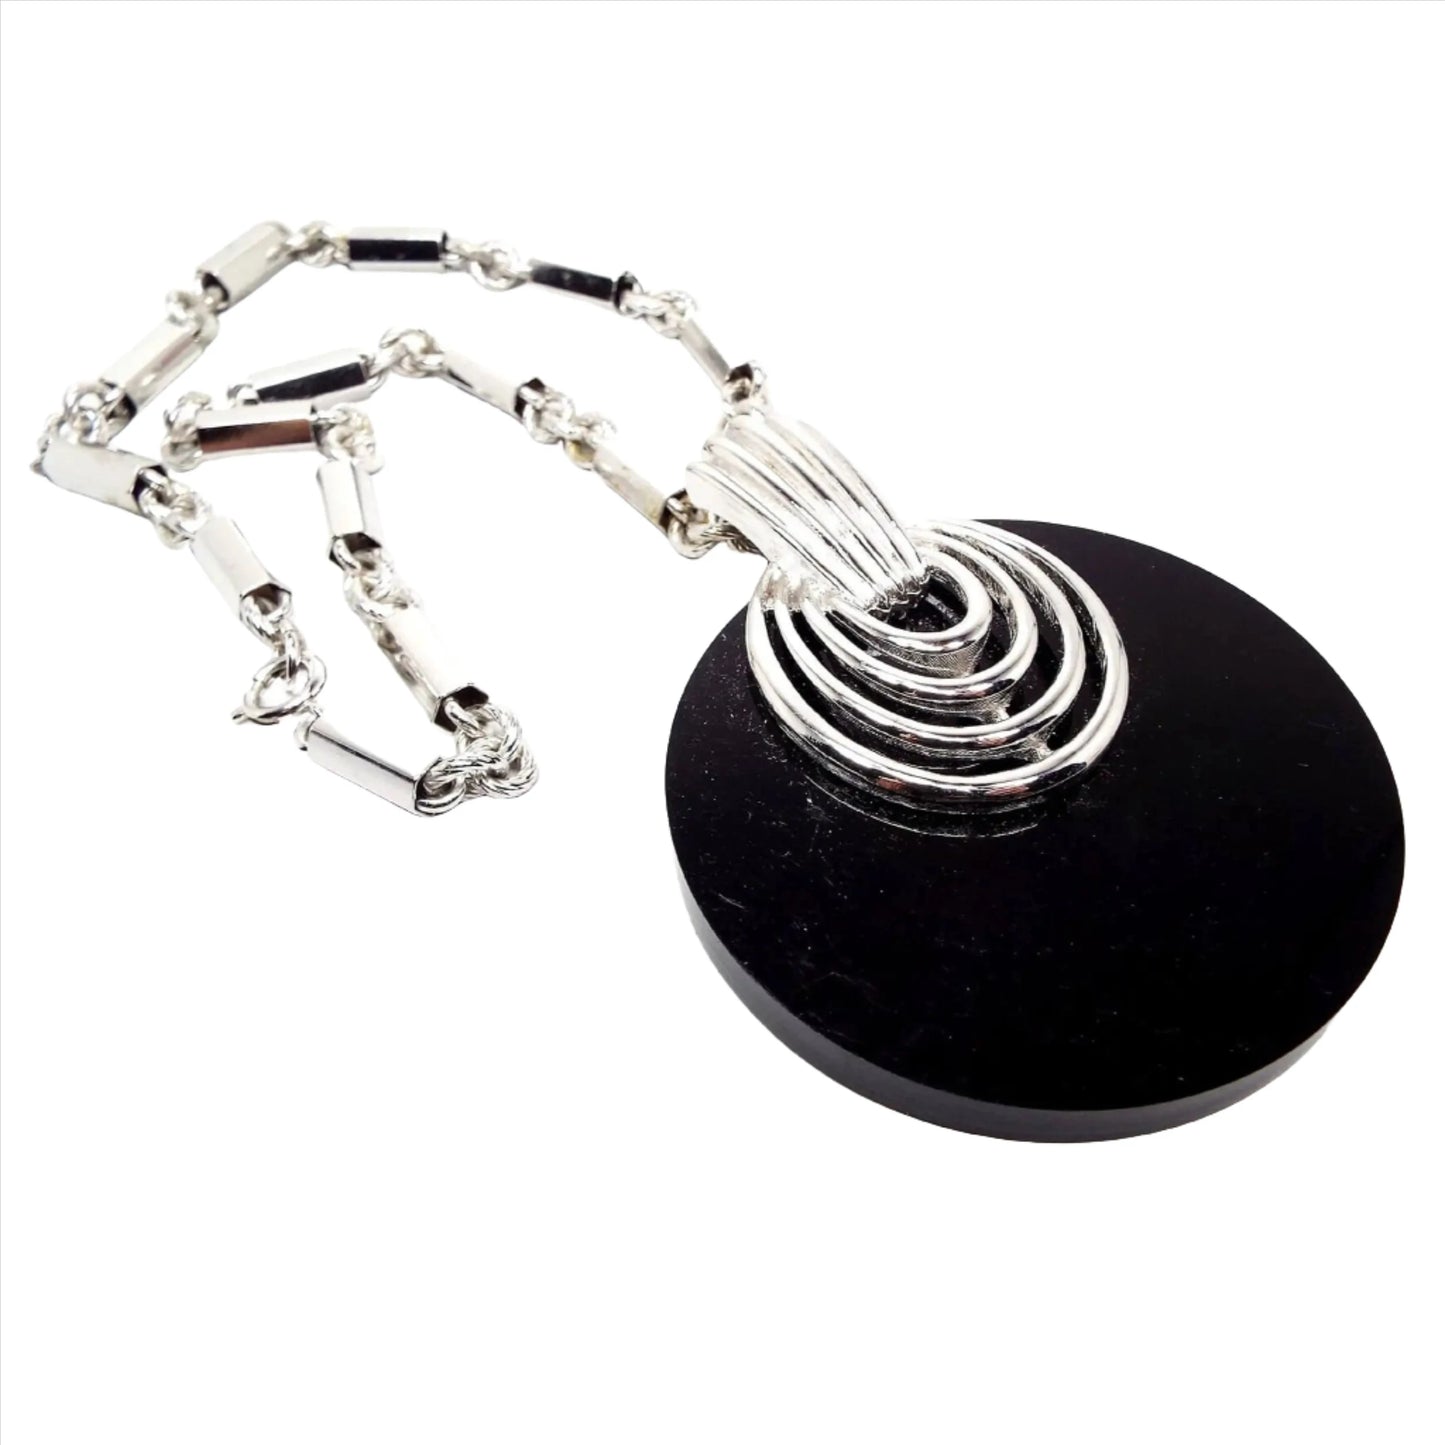 Angled view of the large black pendant necklace. The metal is silver tone in color. The chain has rectangle and textured round links. The pendant is a large black plastic circle that has an silver tone oval rings design at the top and a large silver tone color bail.